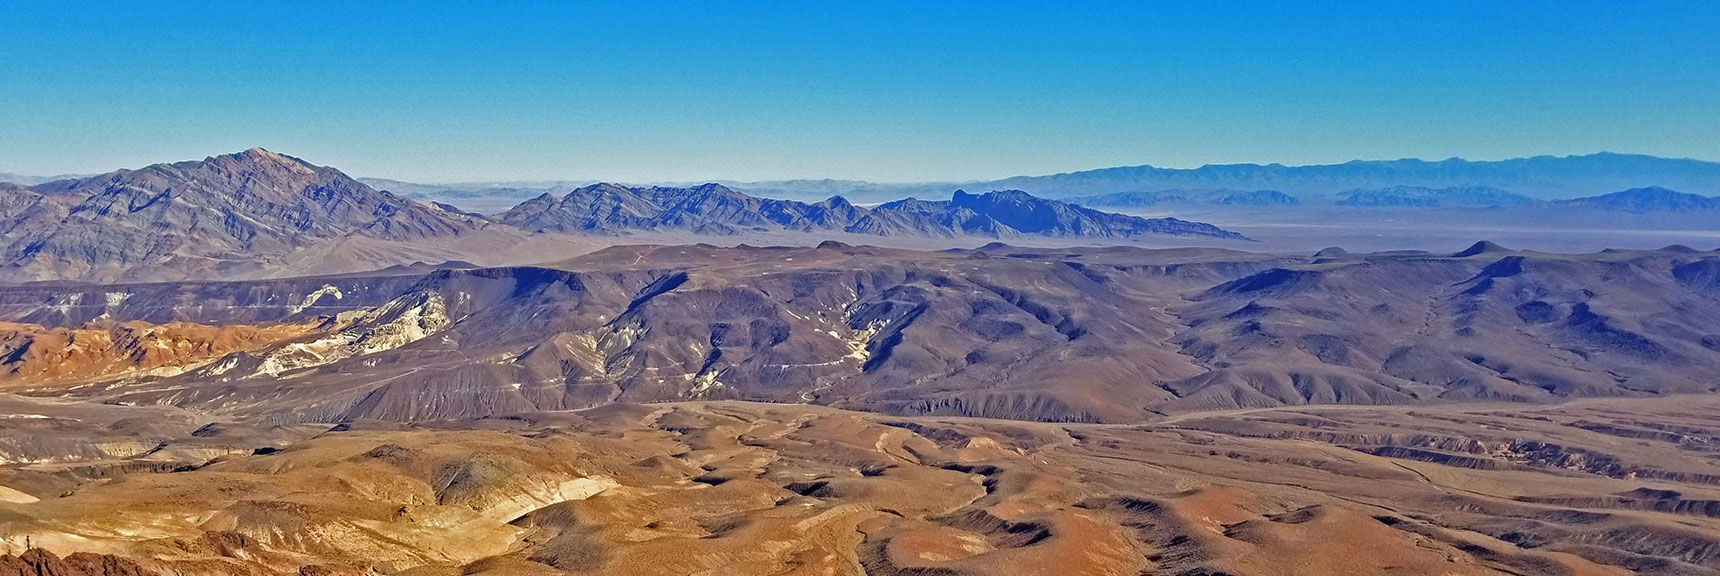 View East from Dante's Ridge | Dante's View to Mt. Perry | Death Valley National Park, CA